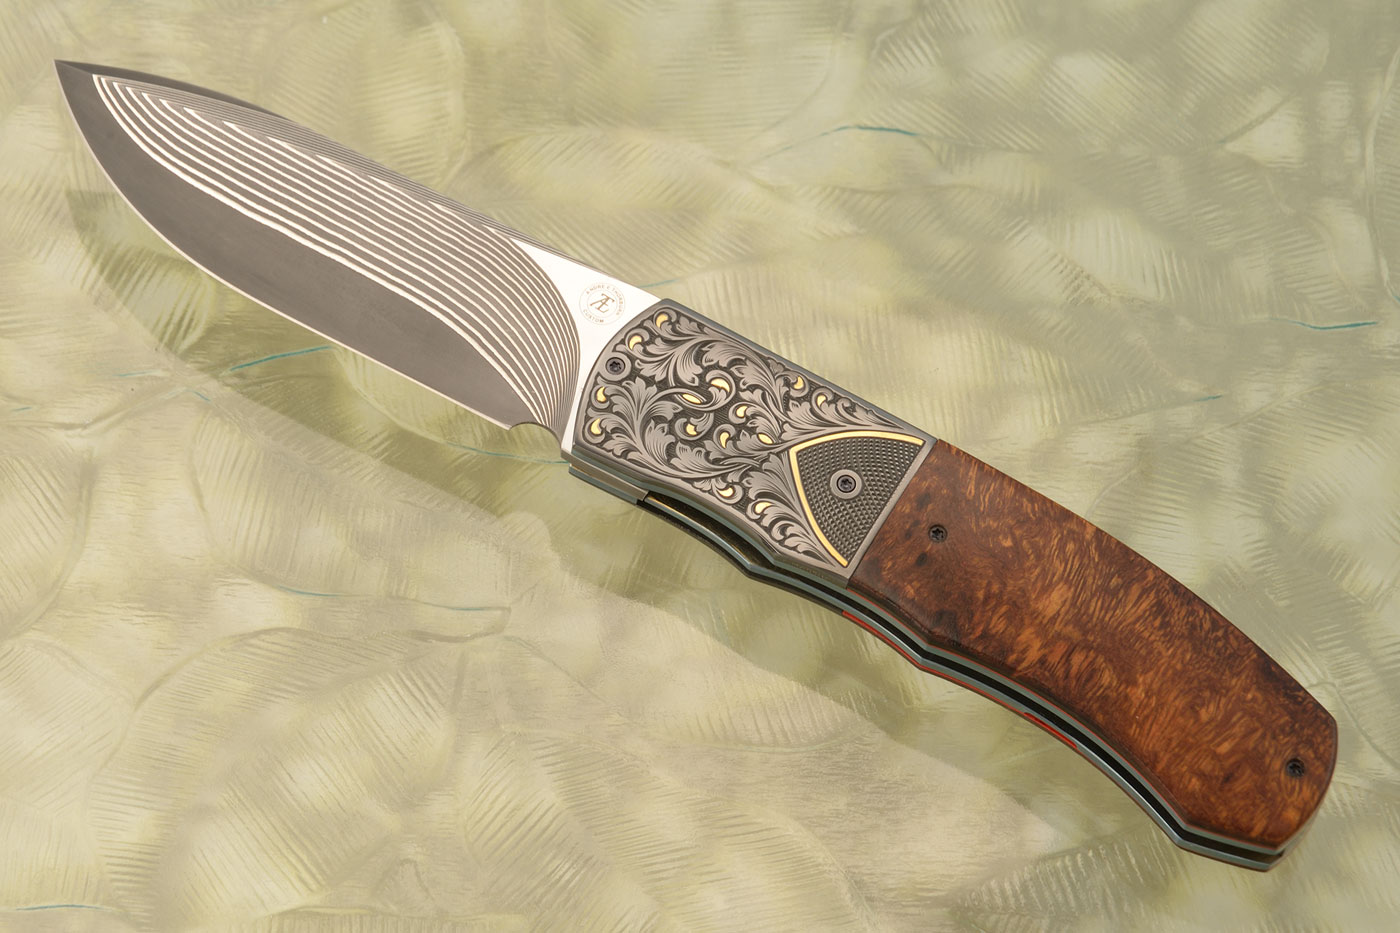 L46 Front Flipper with Ironwood, Engraved Zirconium, and SG2 San Mai (Ceramic IKBS)